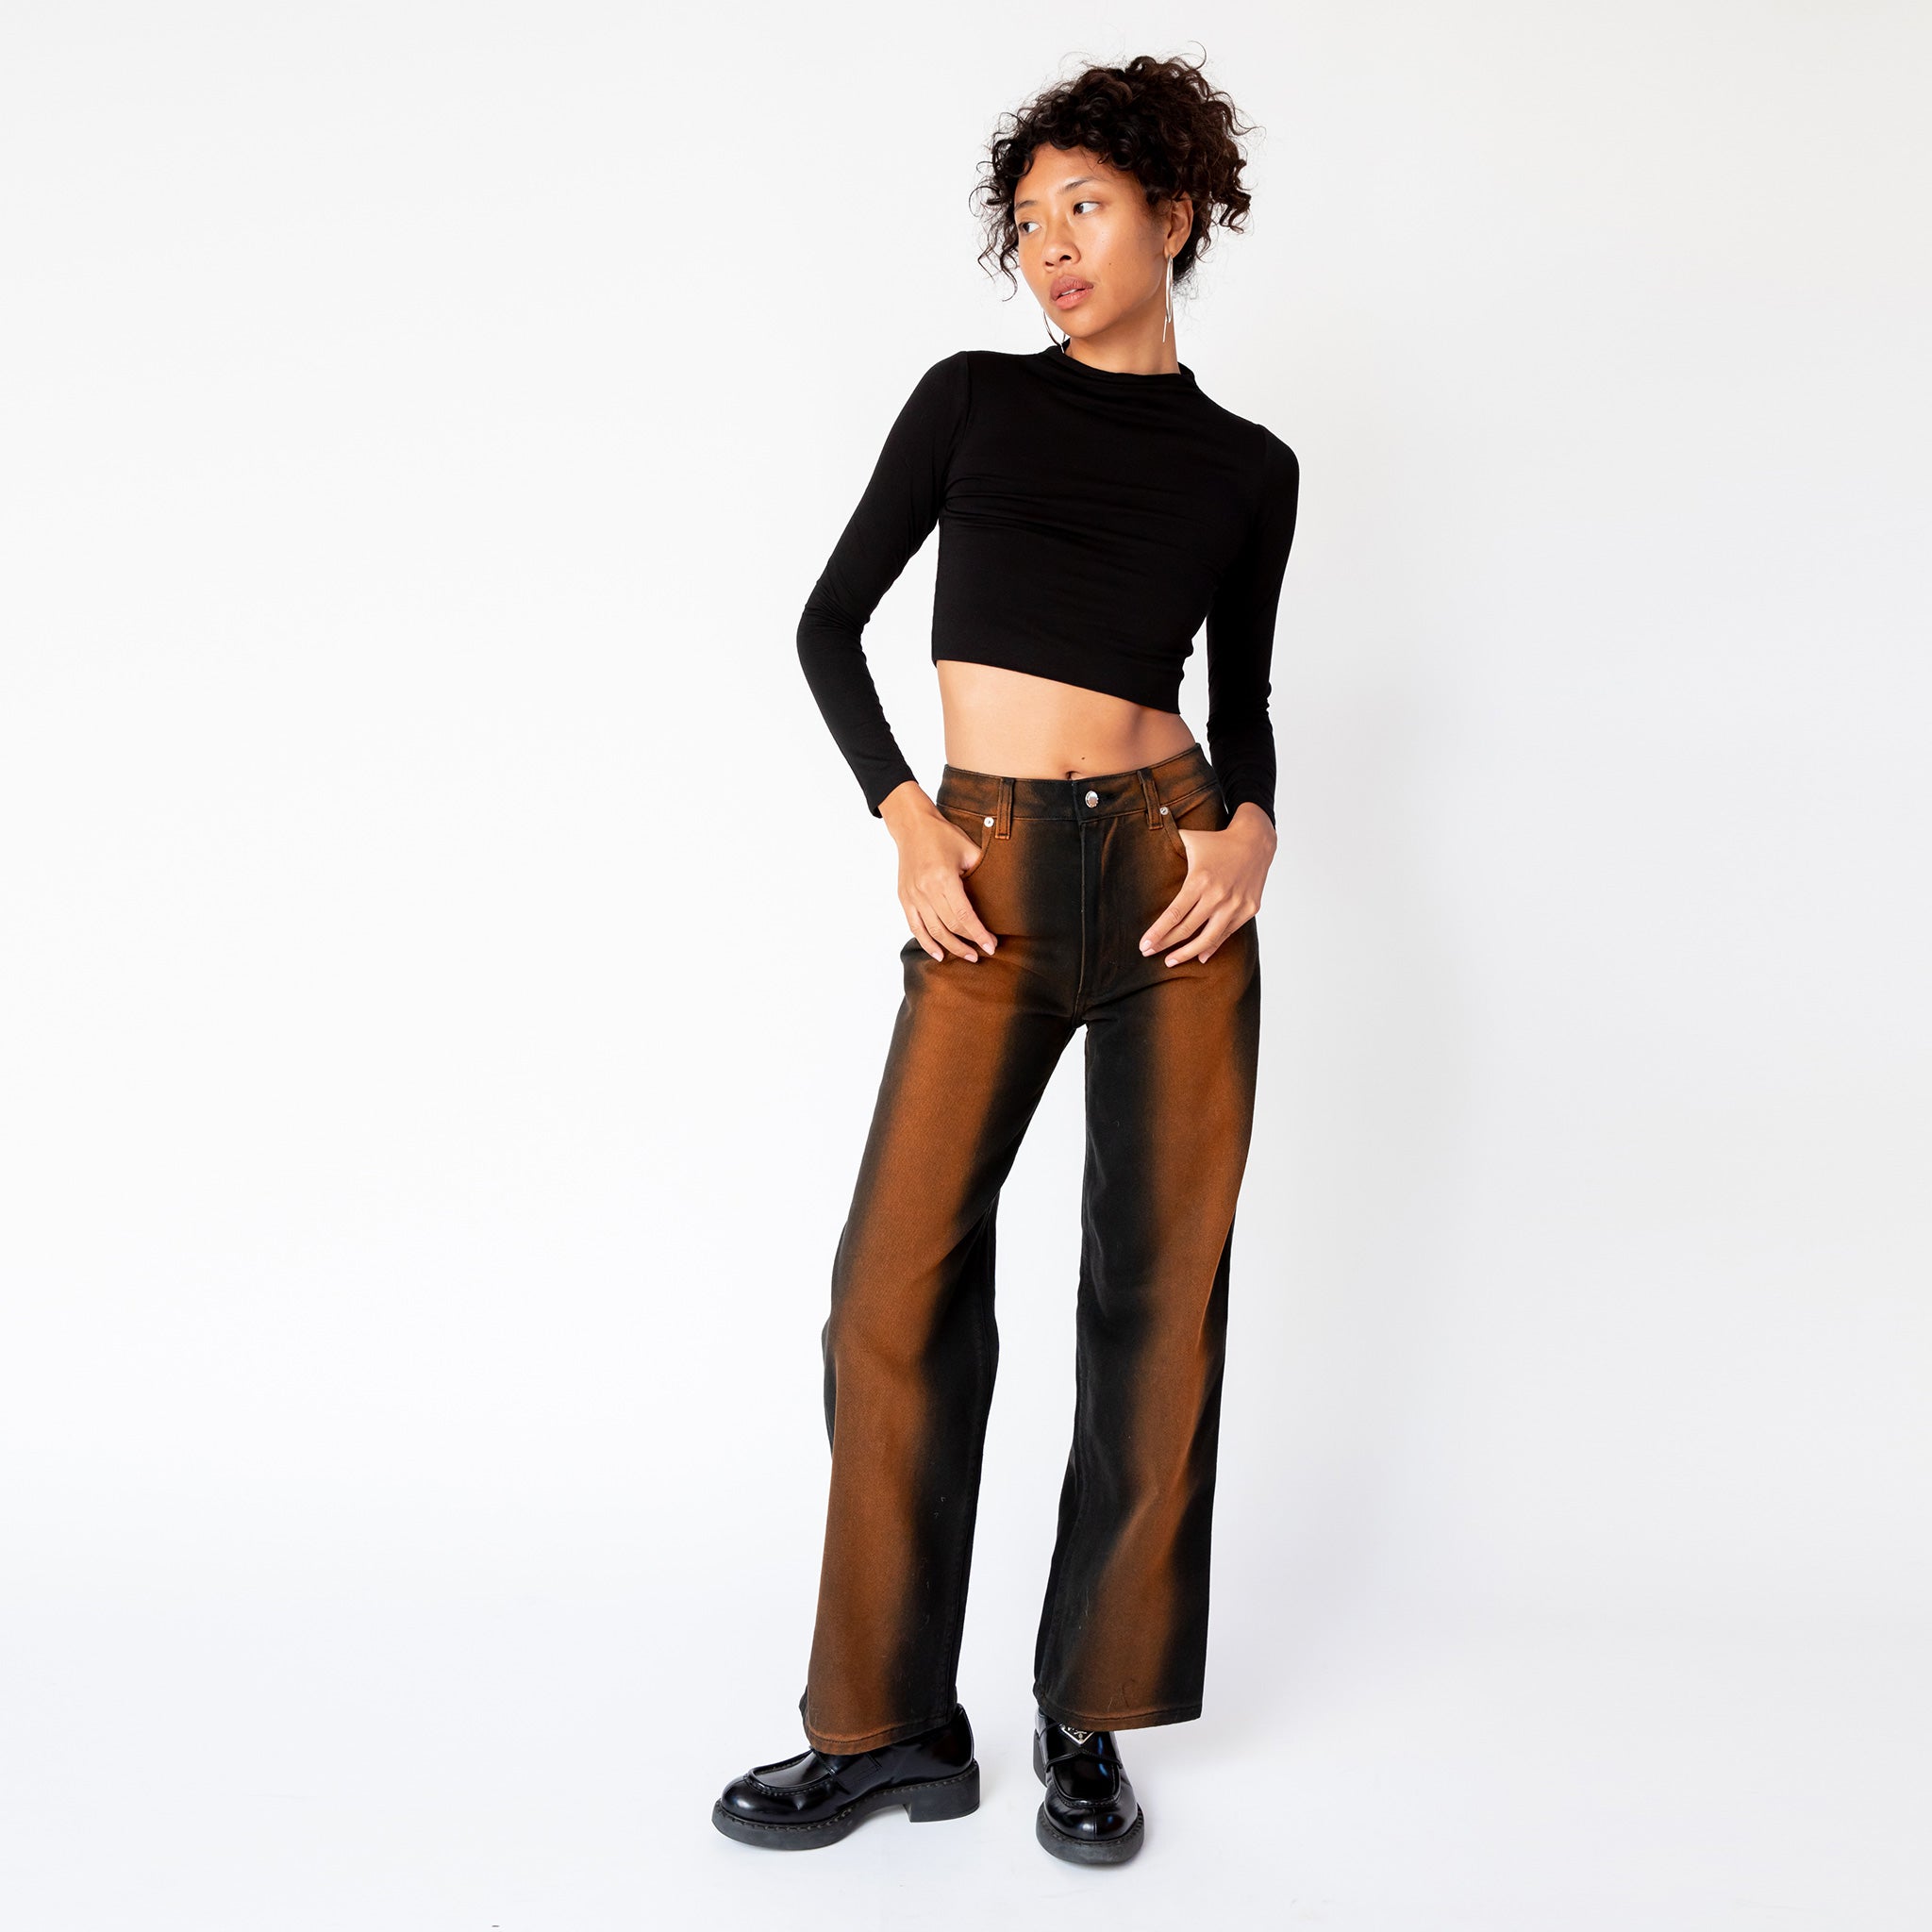 A model looks to the side while wearing Eckhaus Latta's wide leg jeans in ozone, featuring a vertical stripe of rust brown that gradients to black along the sides of the leg, paired with a cropped longsleeved black top.